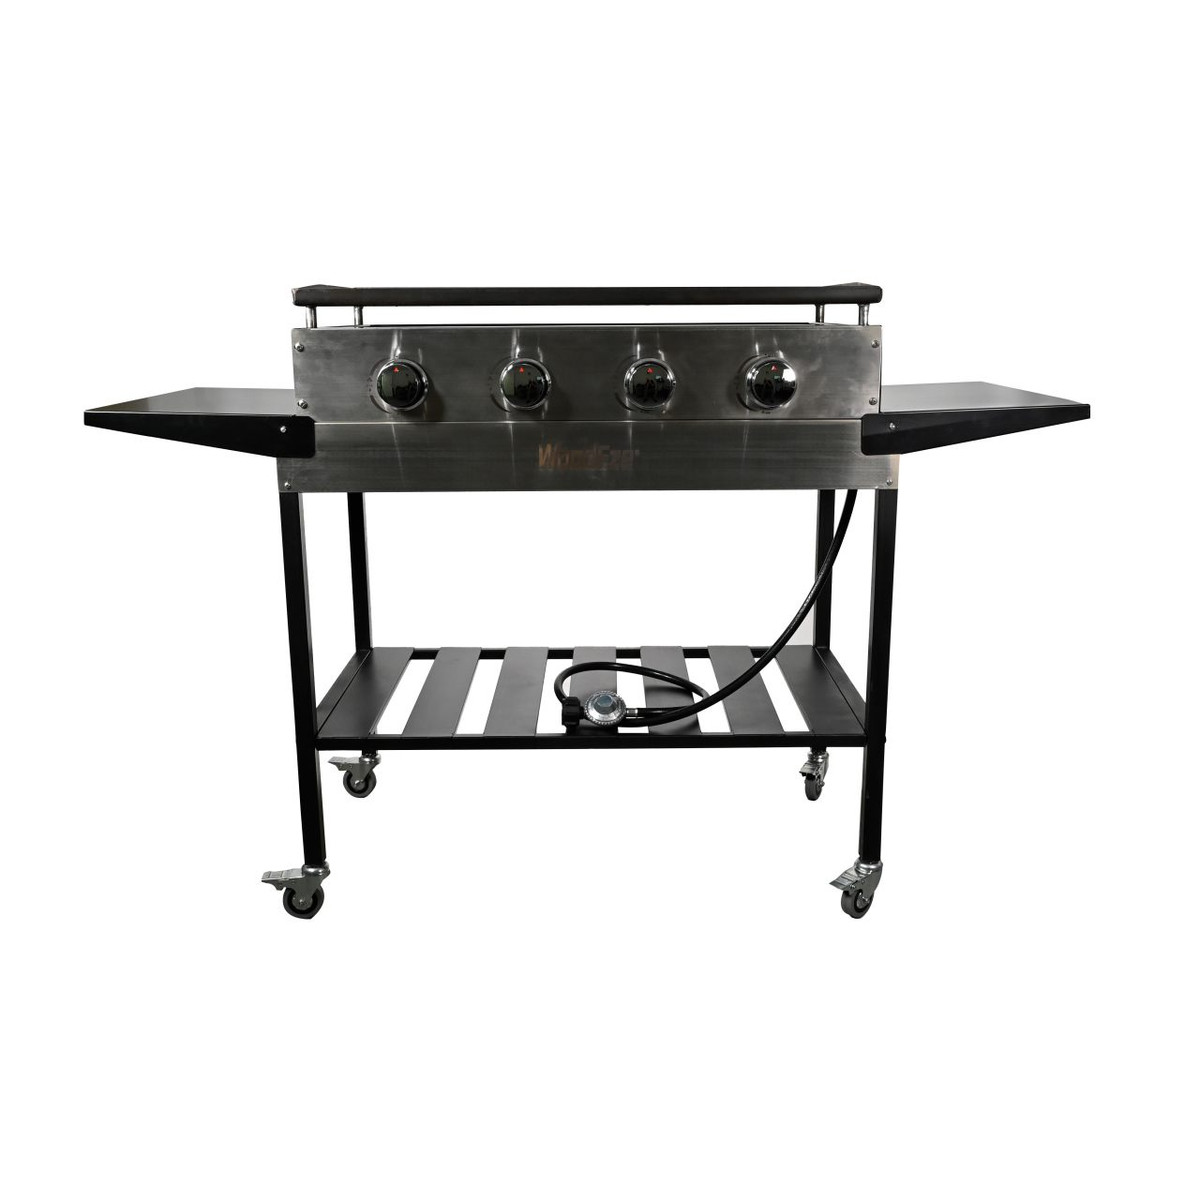 YouYeap 4 Burner Propane Gas Grill Flat Top Griddle Grill, Black 